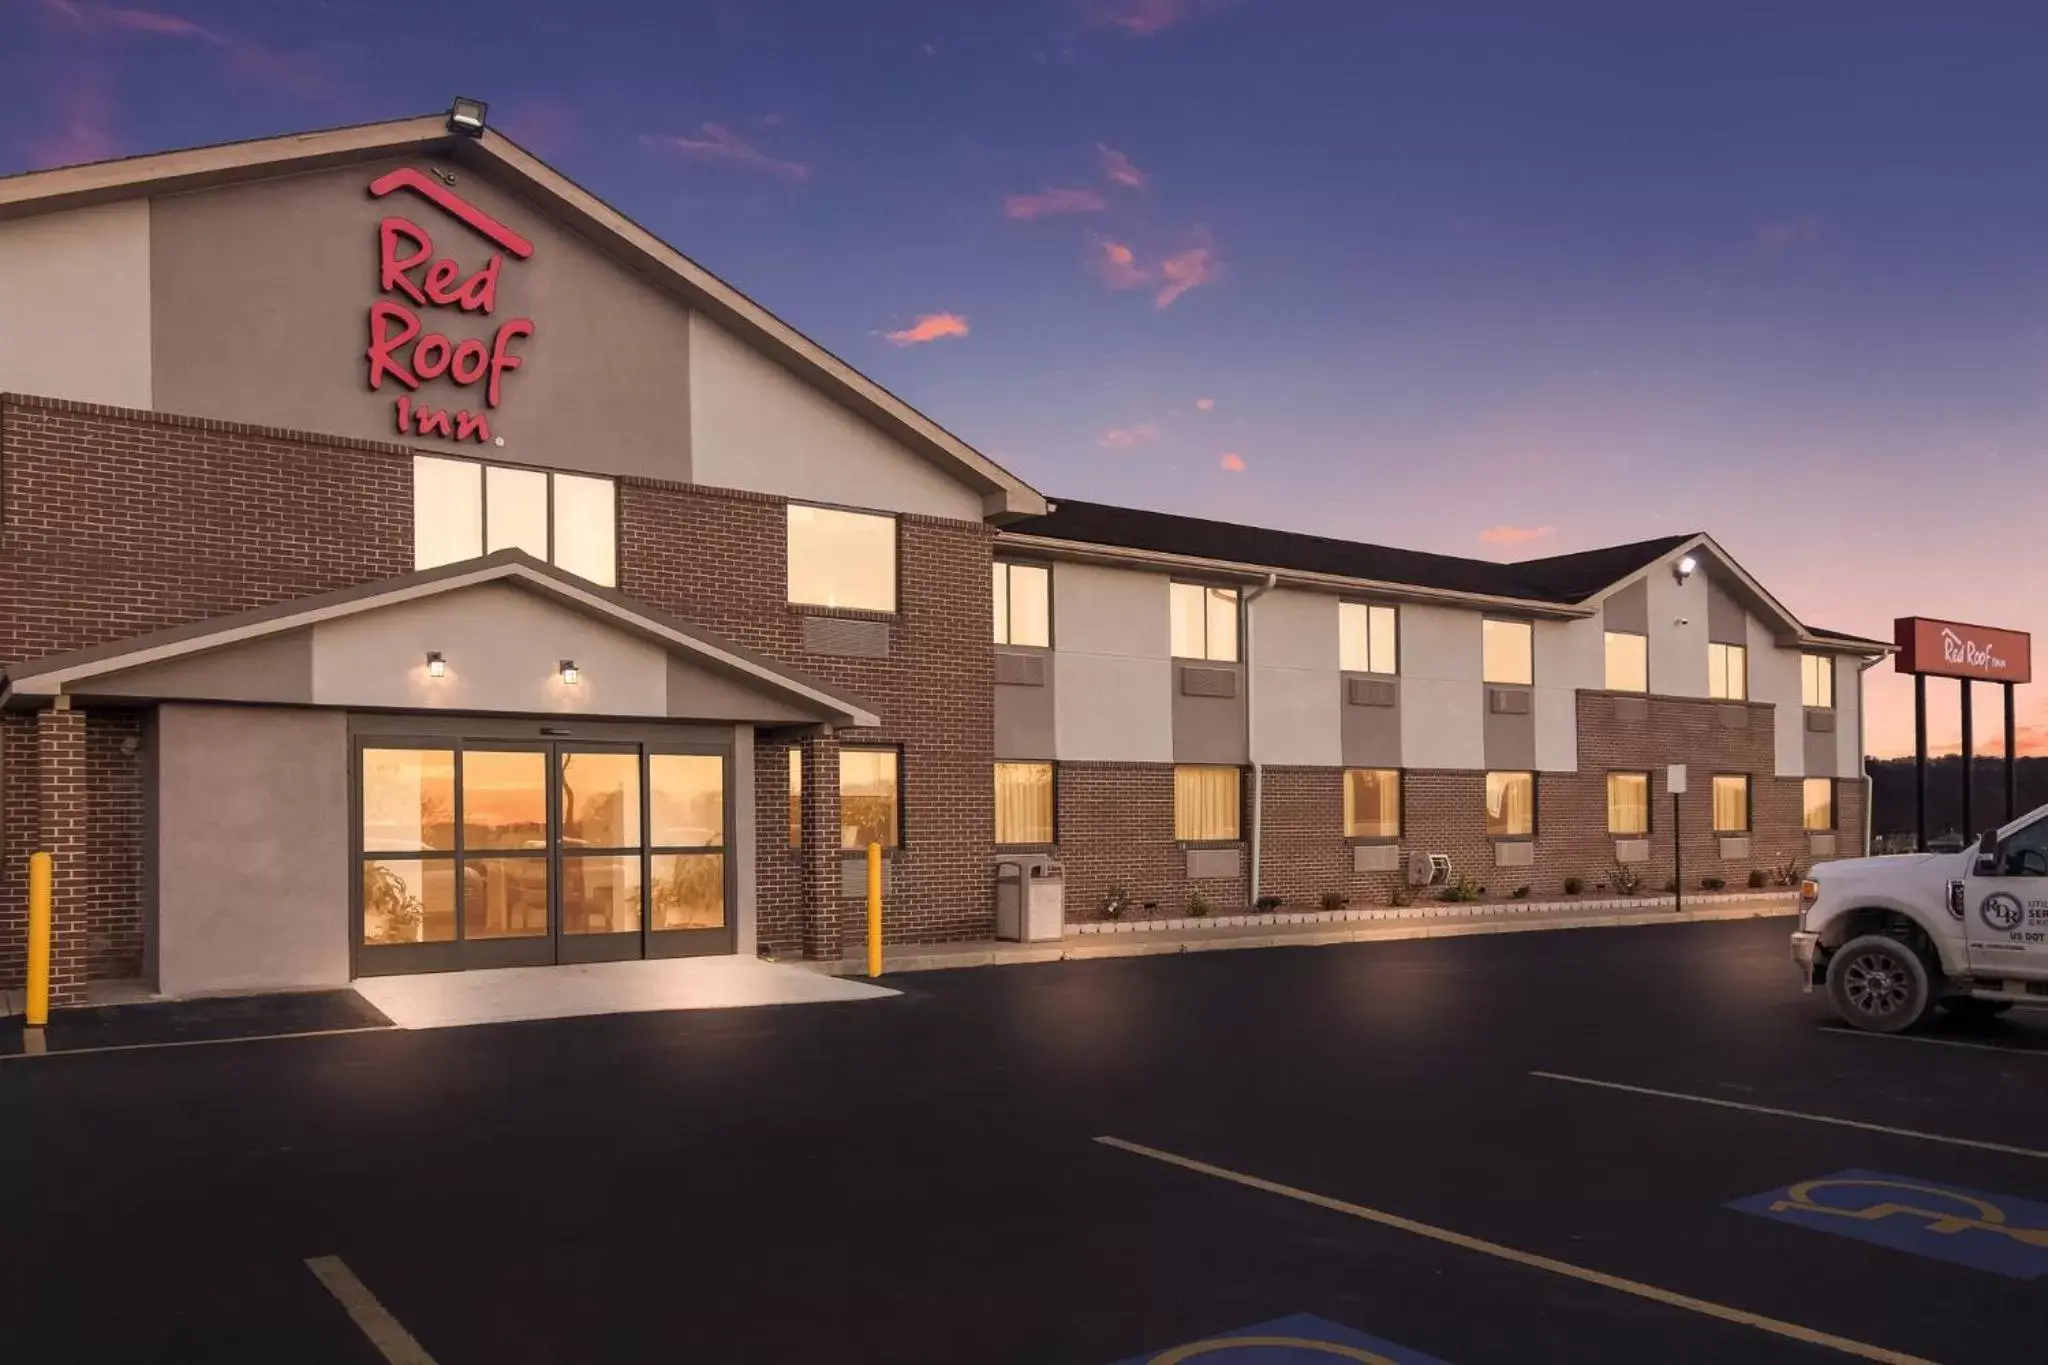 Property Building in Red Roof Inn Greensburg